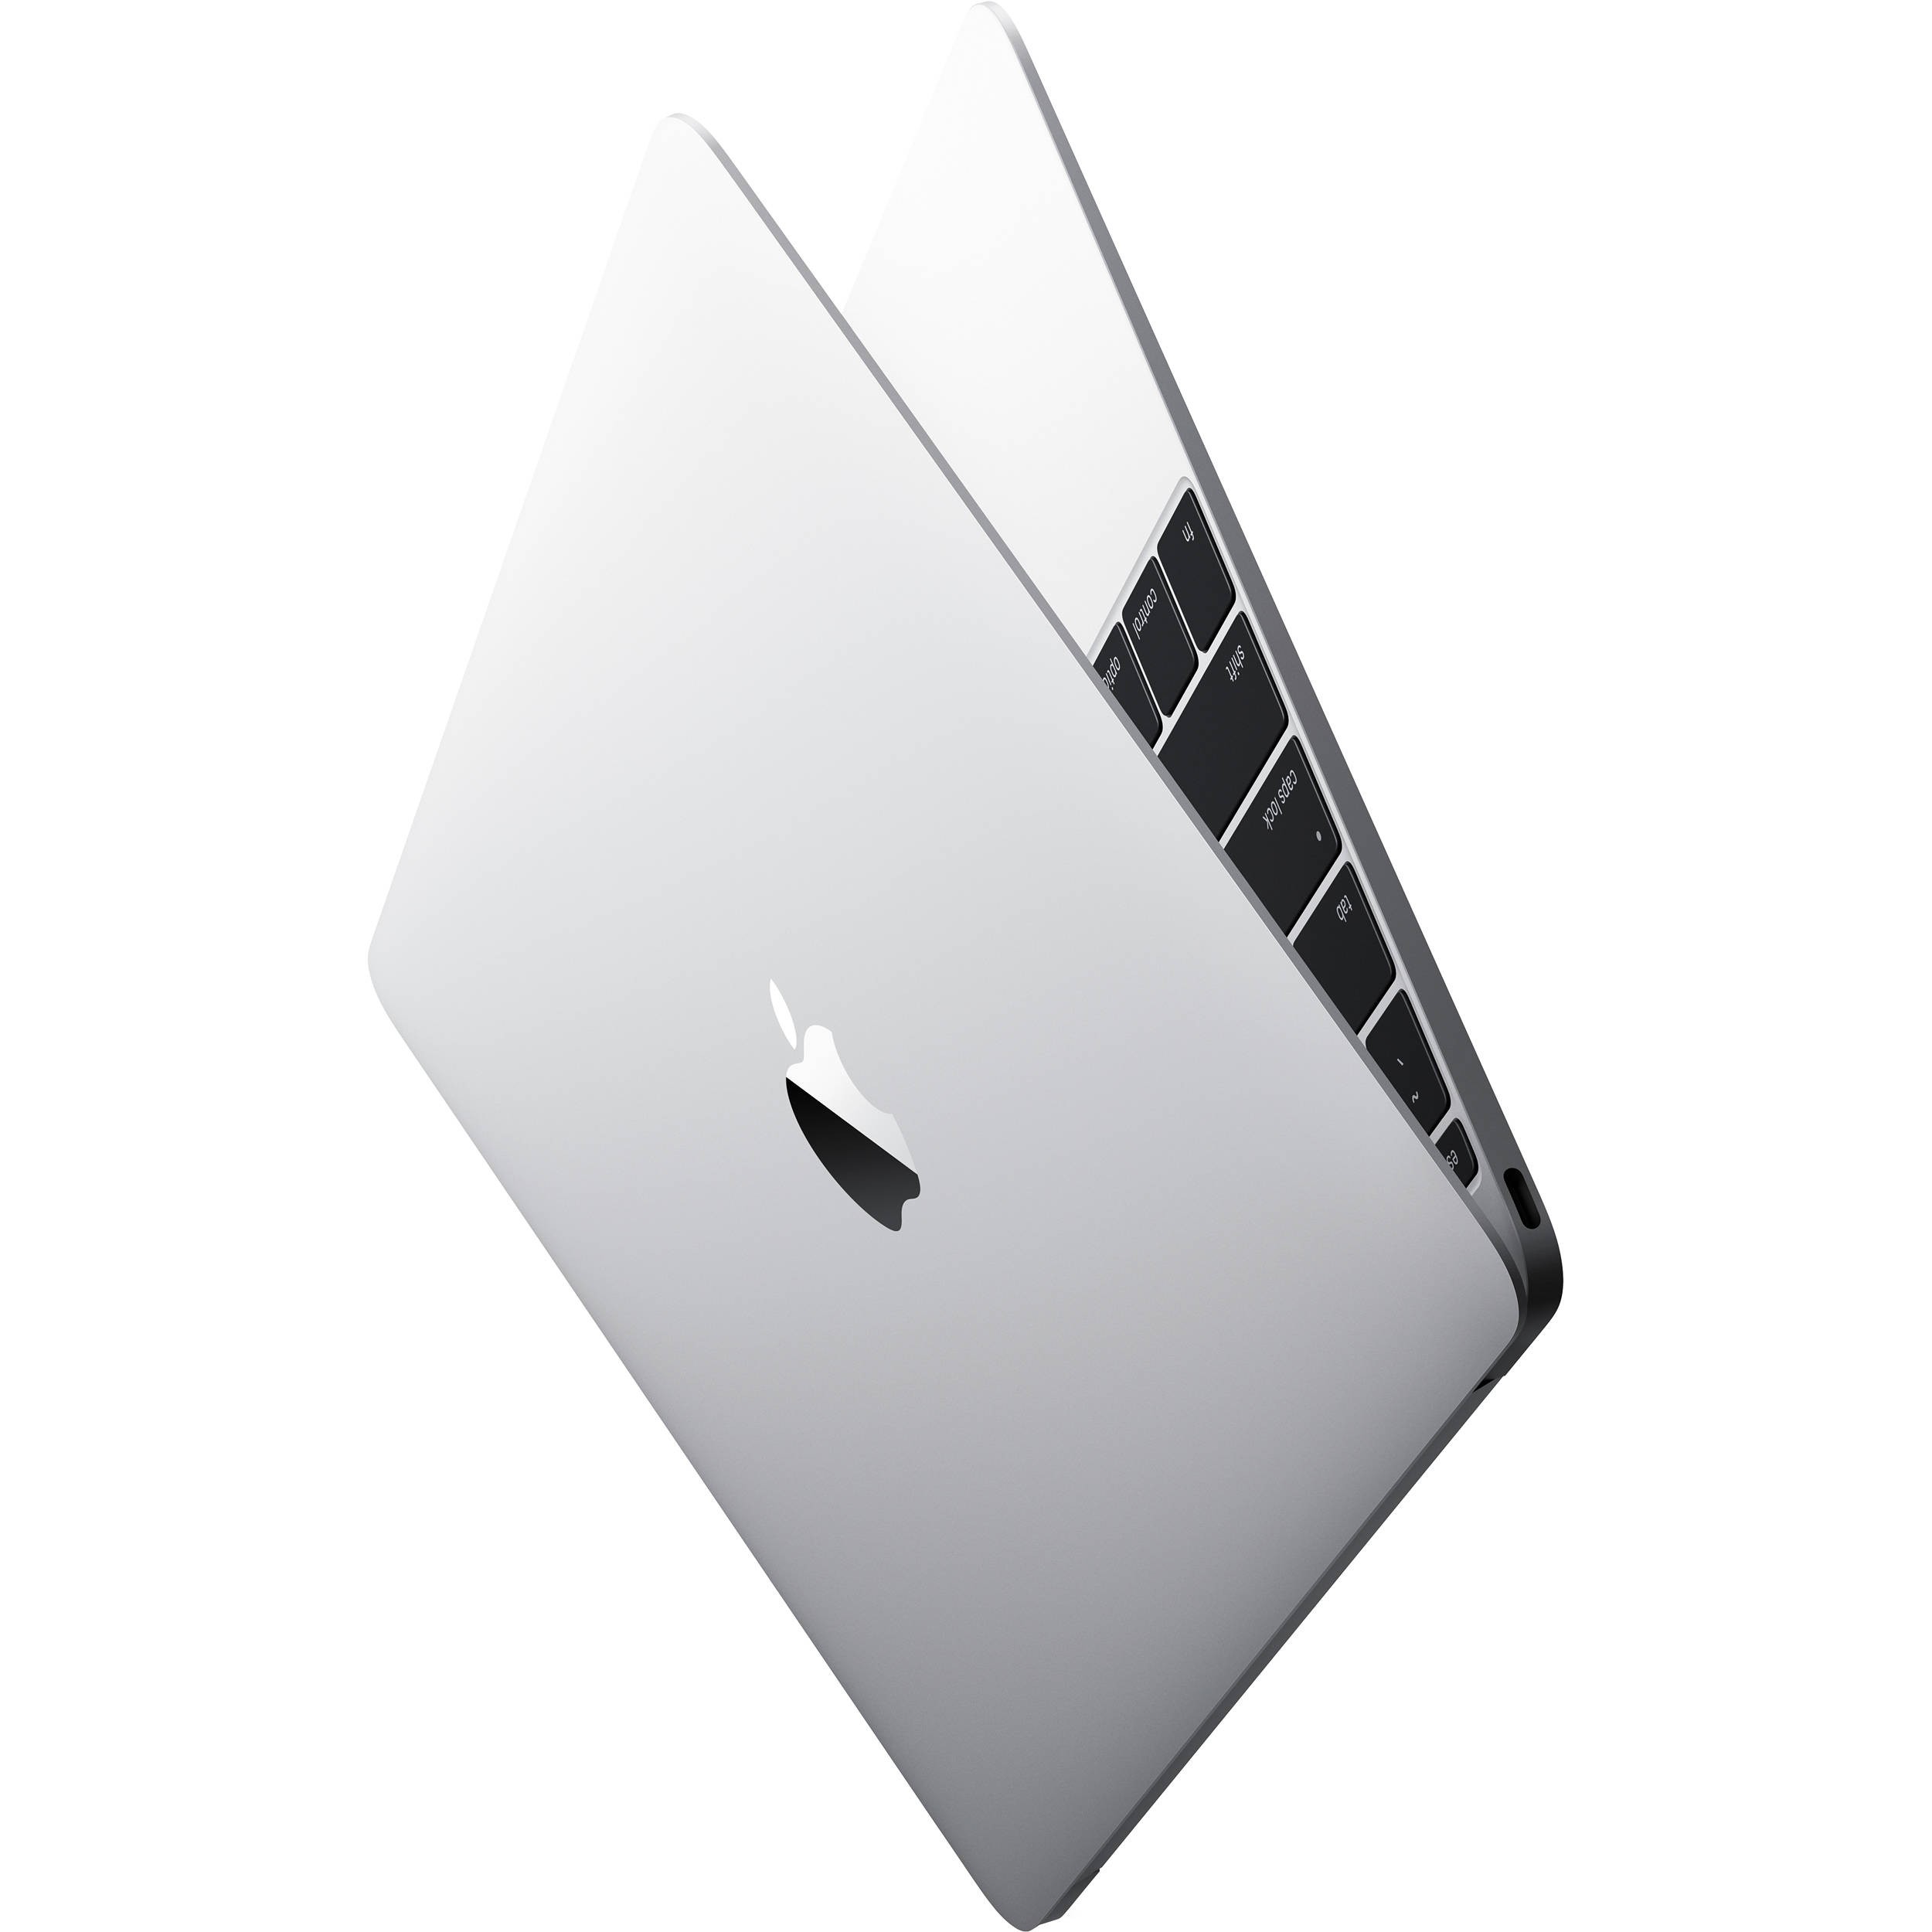 Apple Macbook MF855 12 Retina 1.1GHz Silver (HD) - Parallel Imported